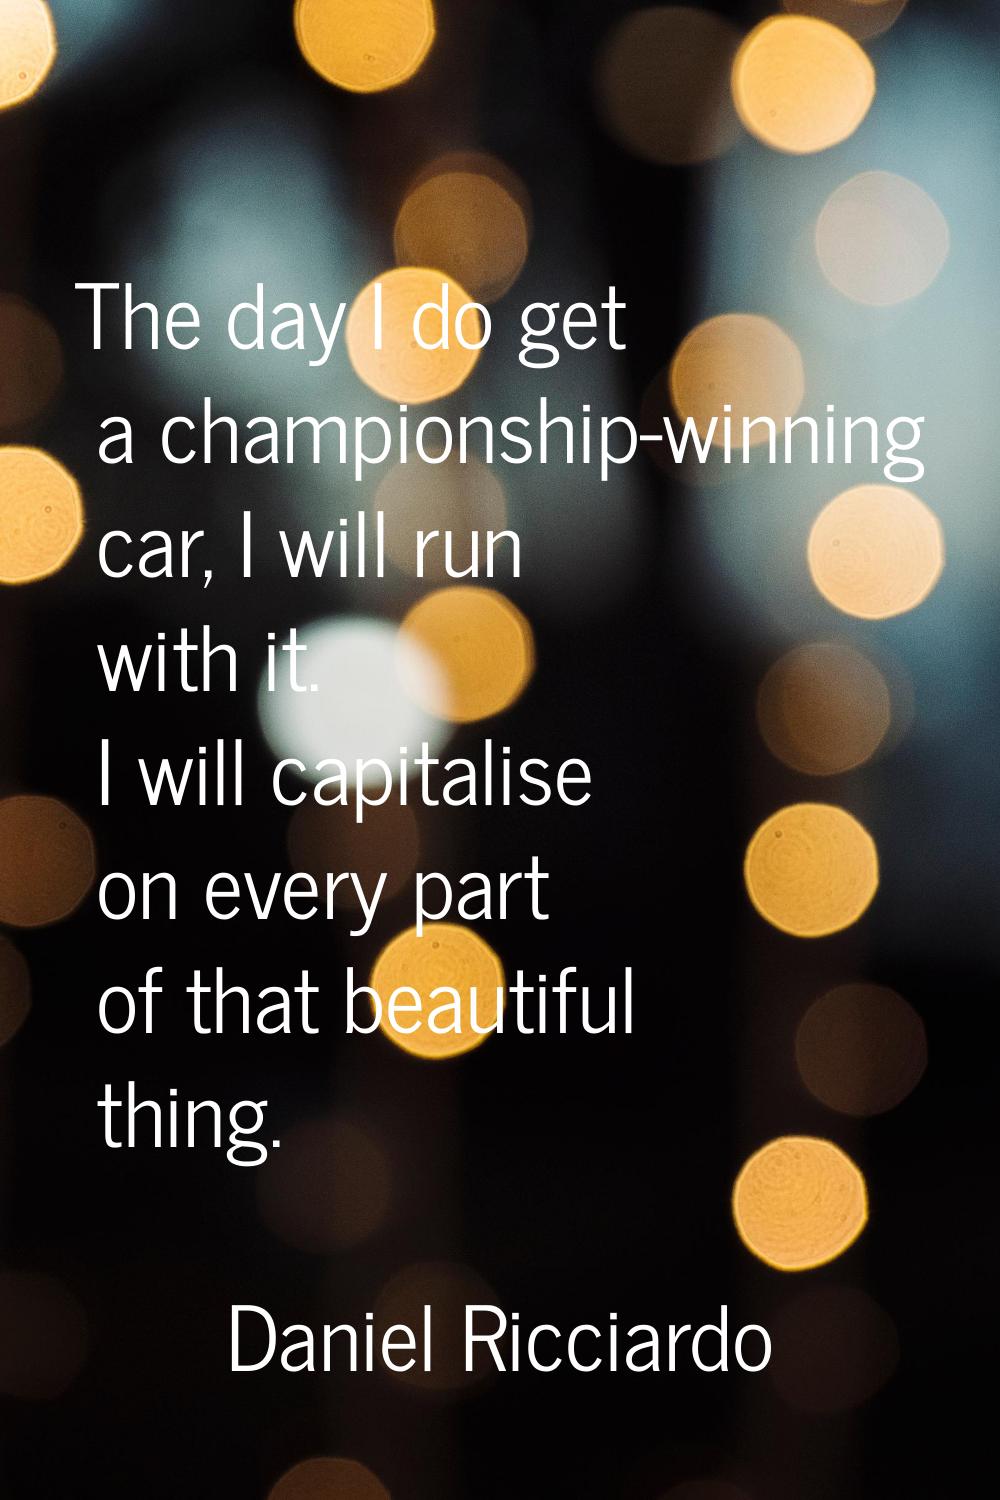 The day I do get a championship-winning car, I will run with it. I will capitalise on every part of